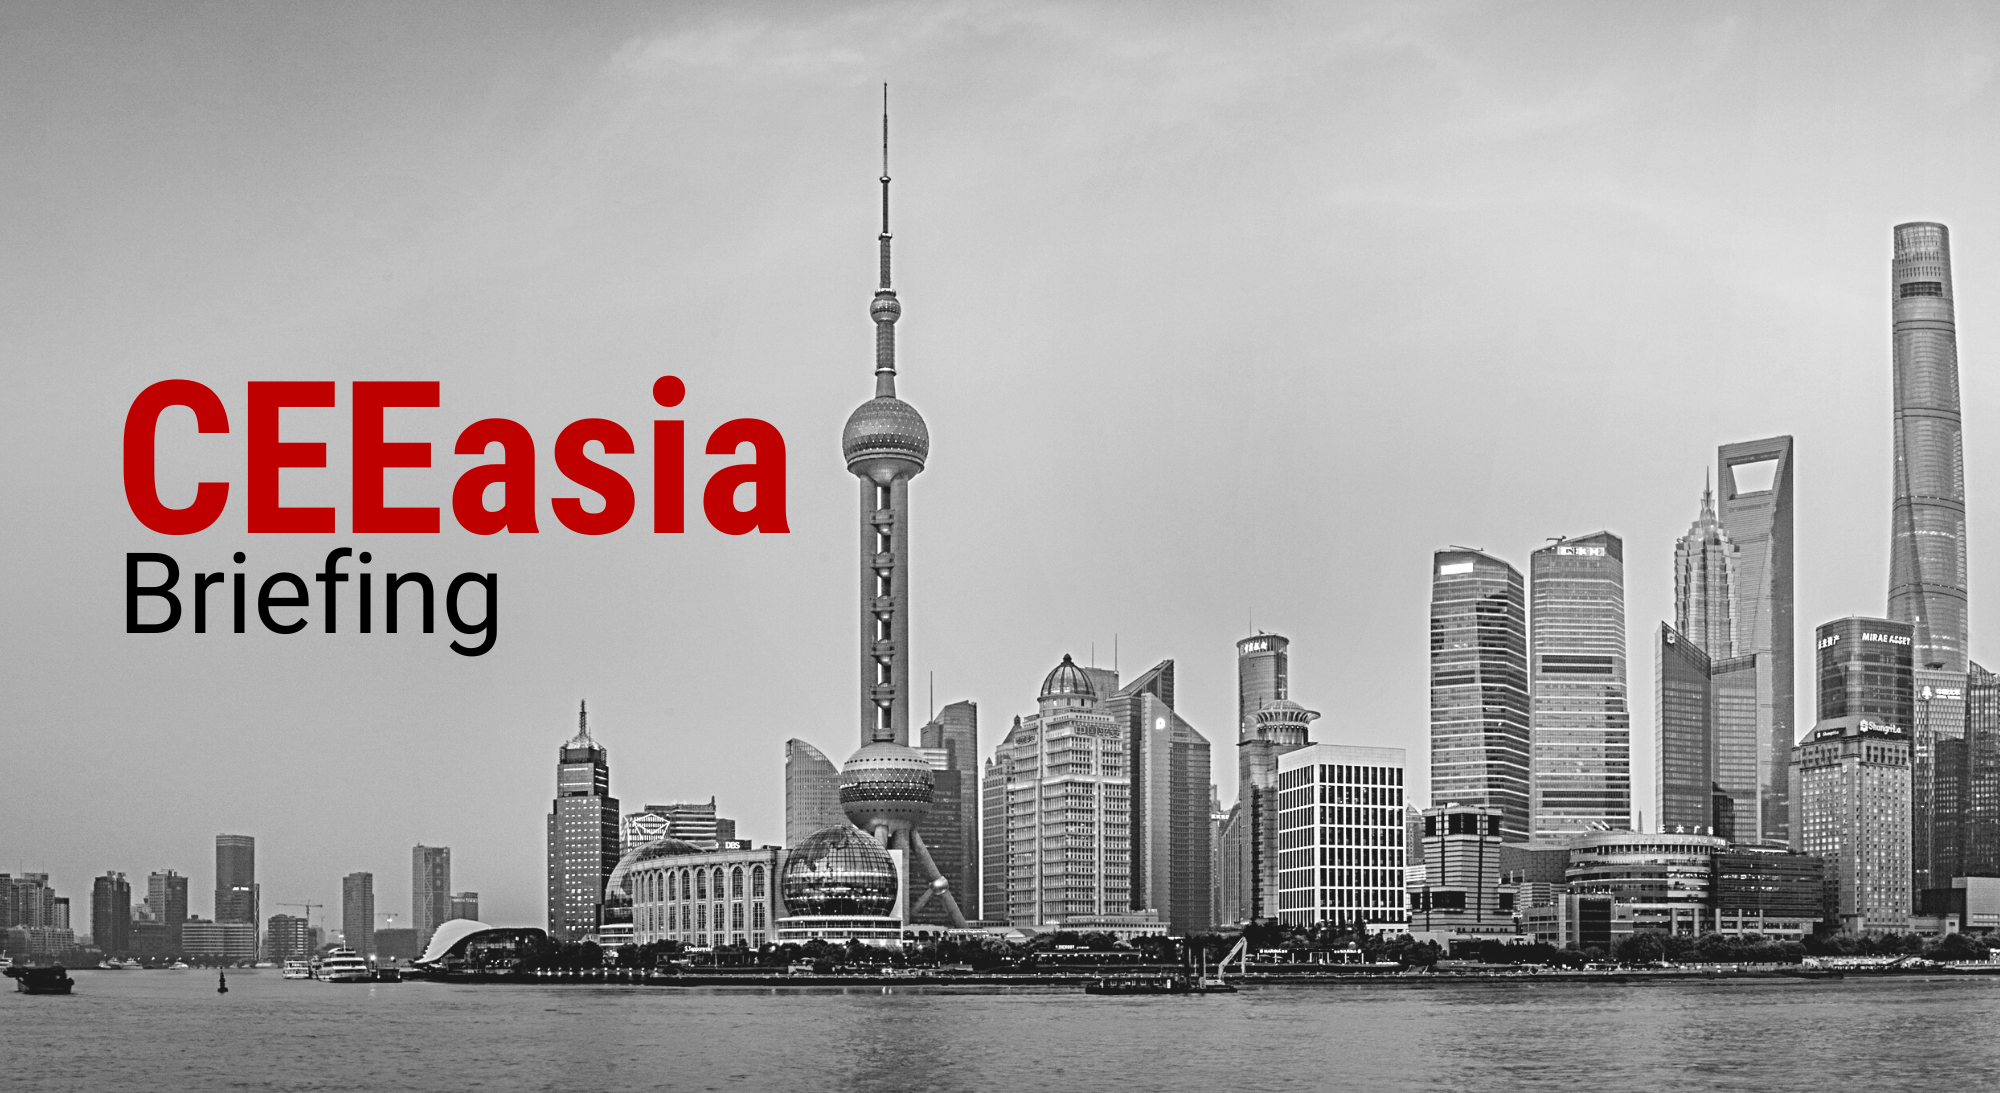 CEEasia Briefing #9: China reacts to Vystrčil’s visit to Taiwan, Slovakia’s Security Report 2019, EU-China Summit, Japanese government reshuffle, Future of travel between the EU and India